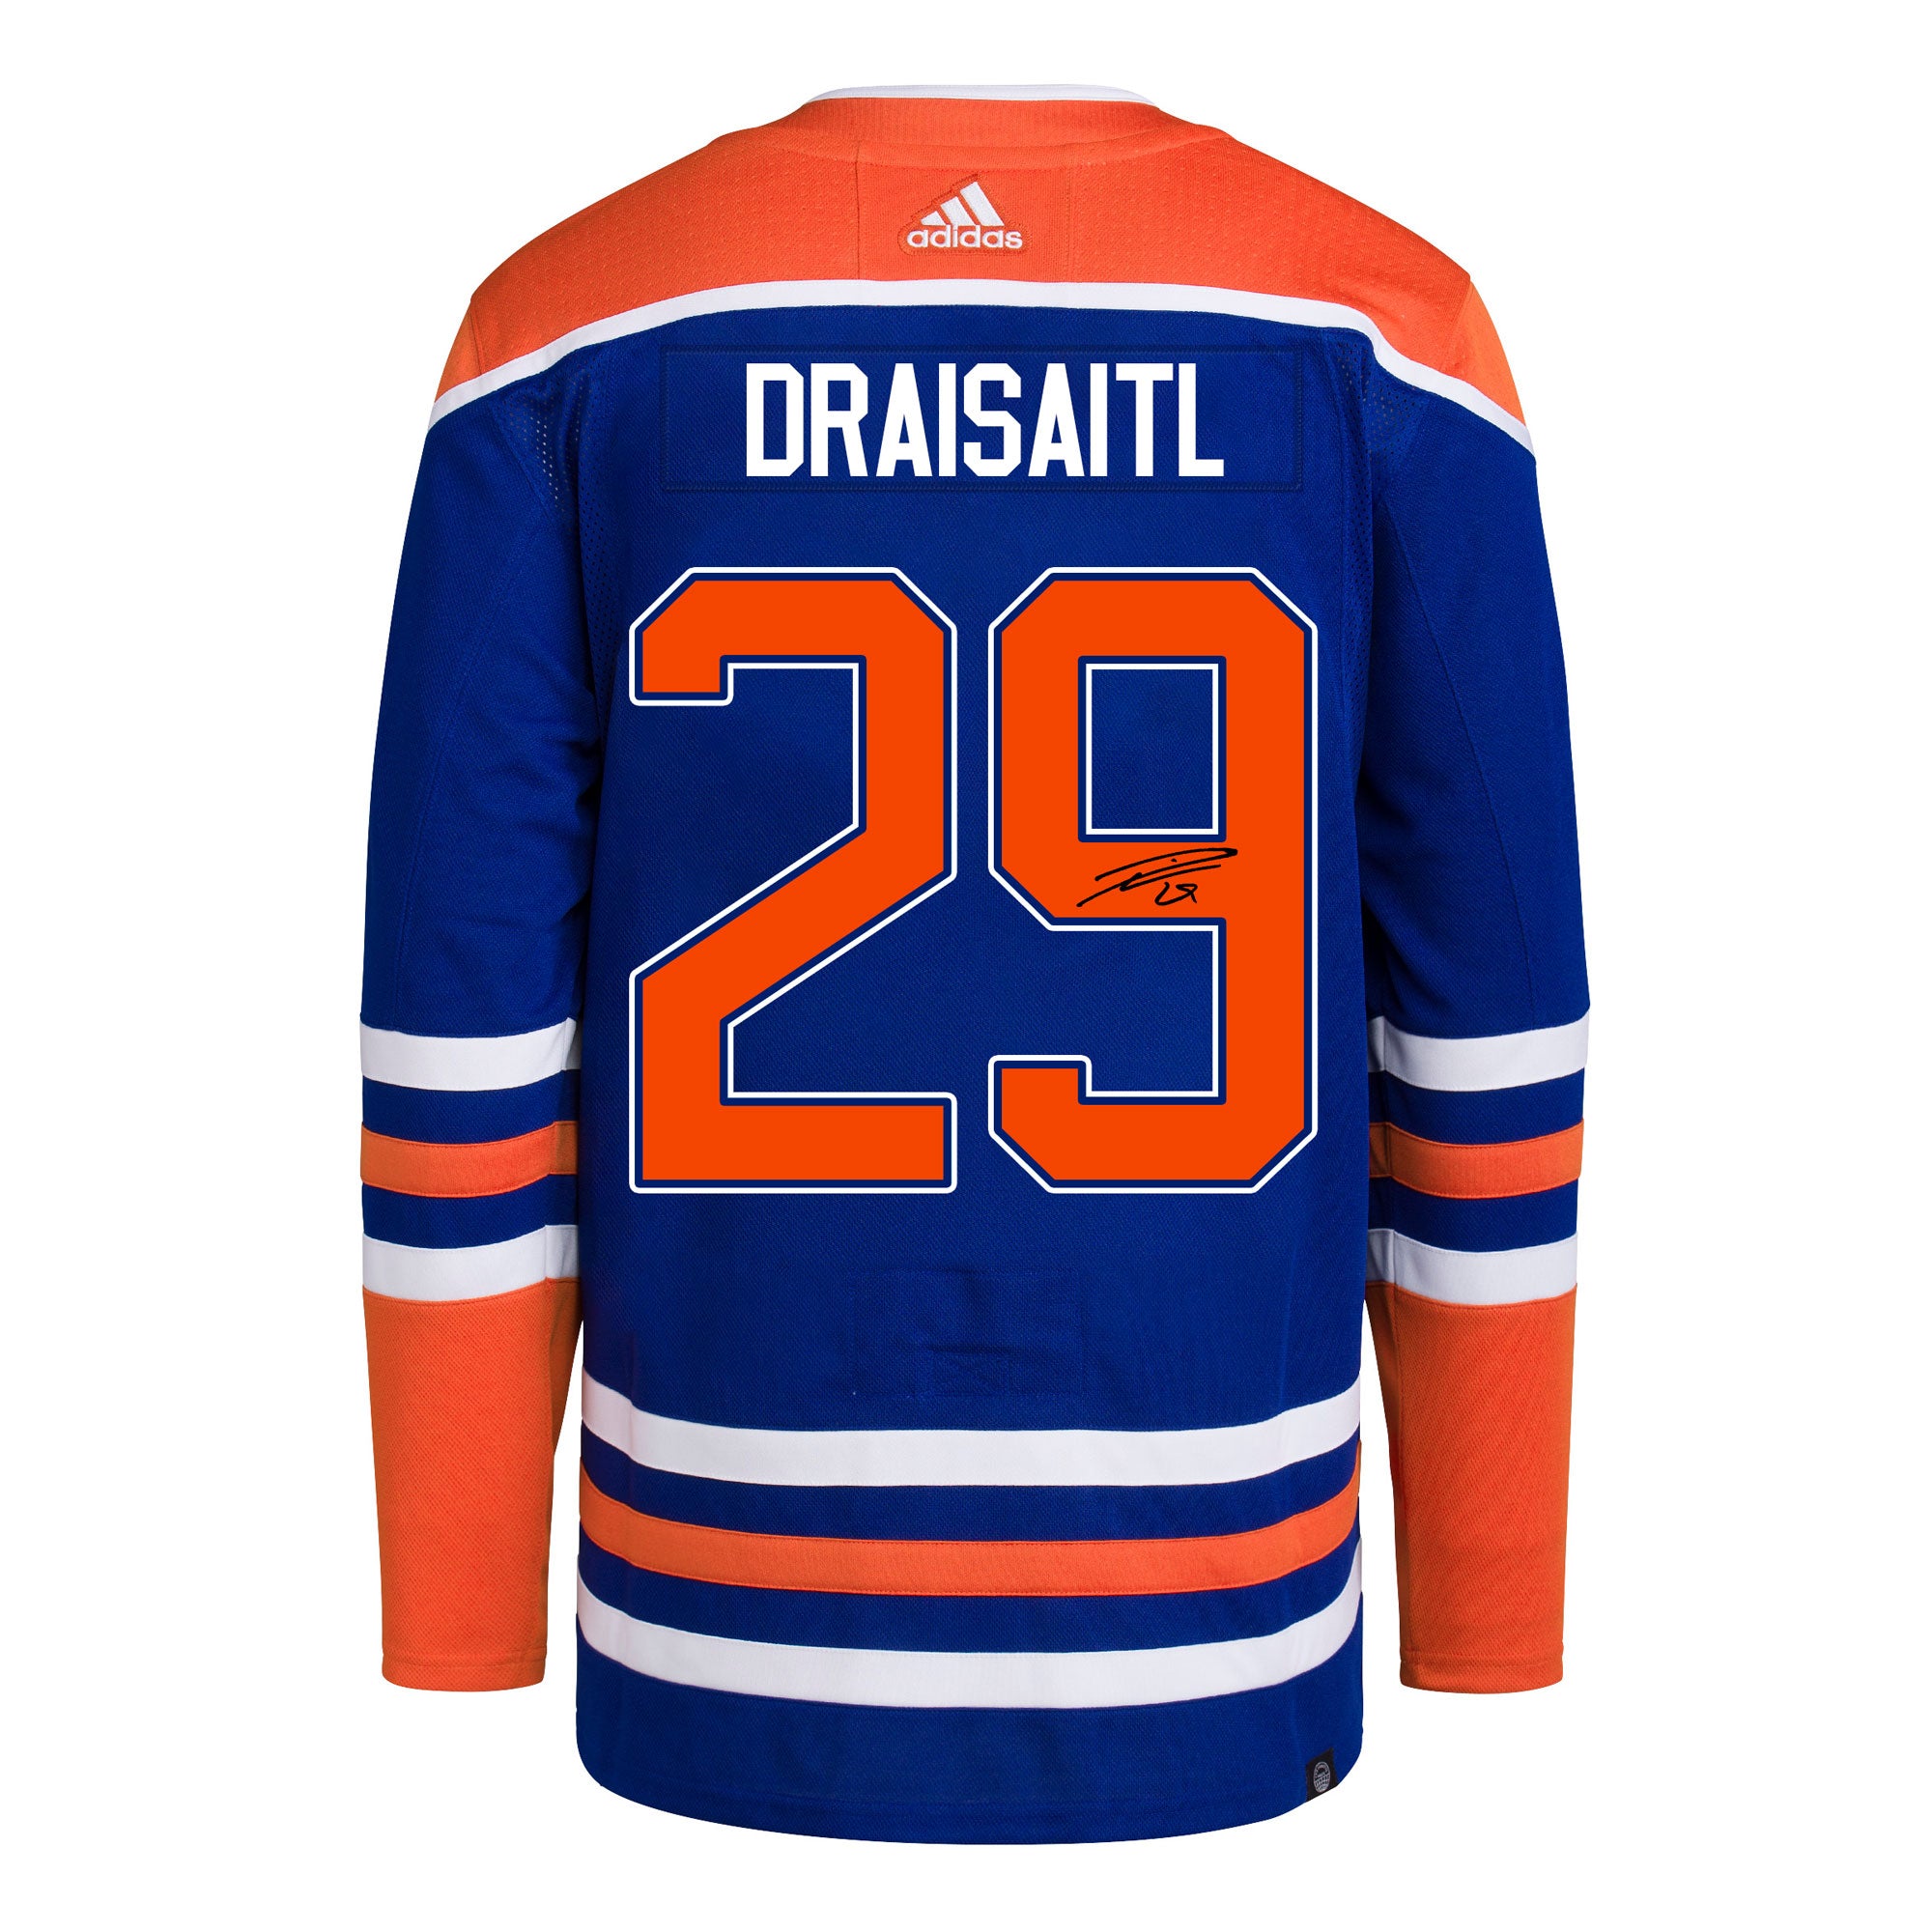 Leon Draisaitl Signed & Inscribed '2020 Hart' White Oilers Adidas